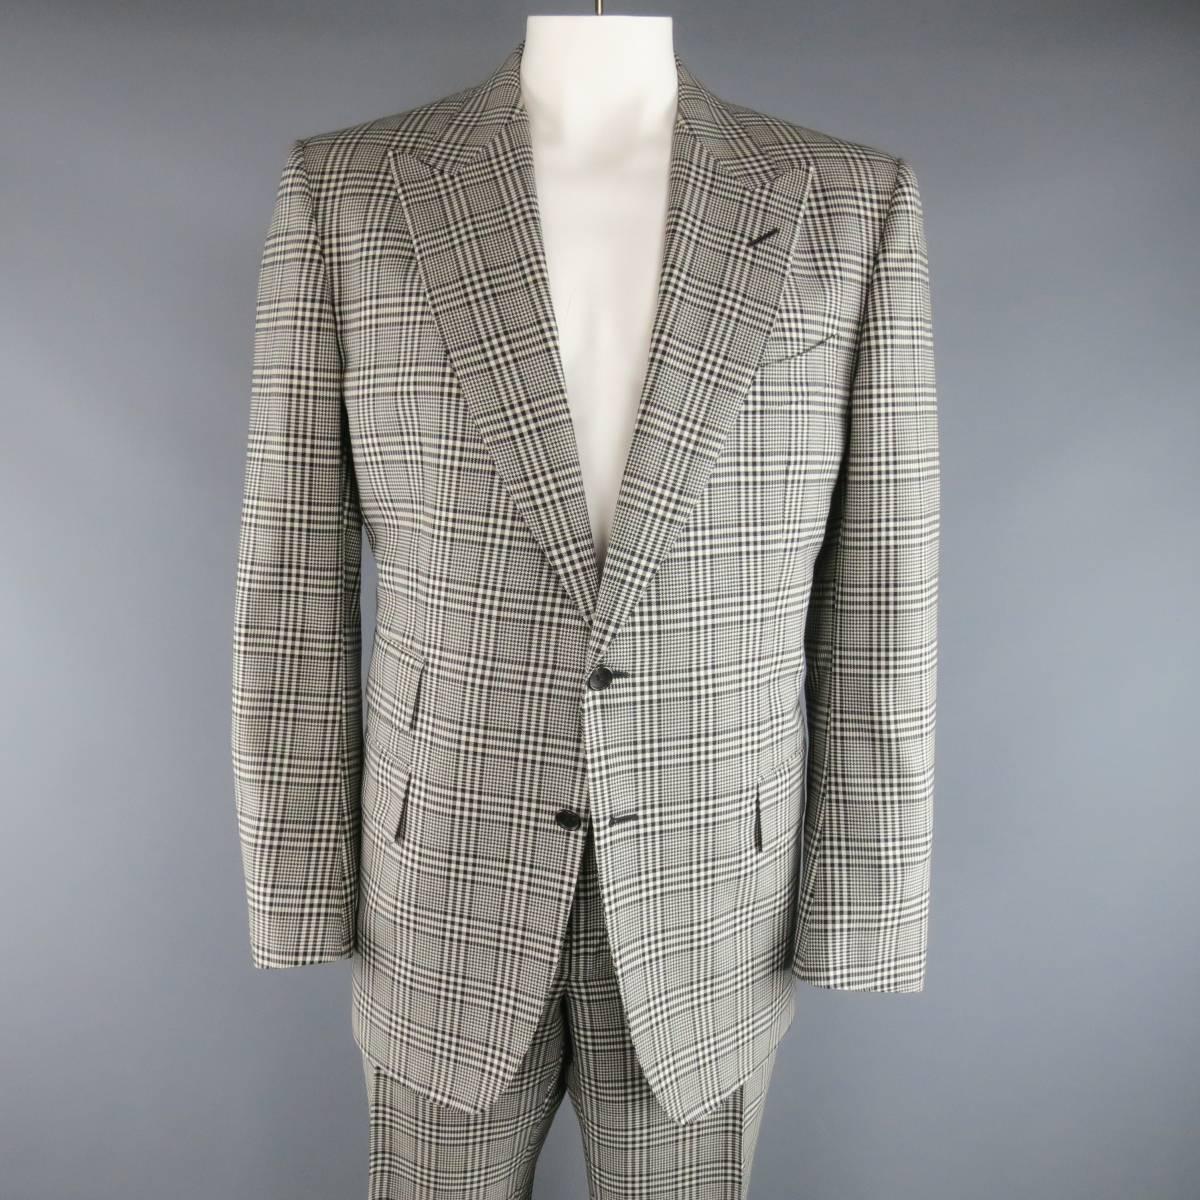 Two Piece Tom Ford suit comes in an off white and black large scale glenplaid print wool mohair blend fabric and includes a two button, peak lapel sport coat with triple flap pockets, and functional button cuffs with matching flat front, adjustable